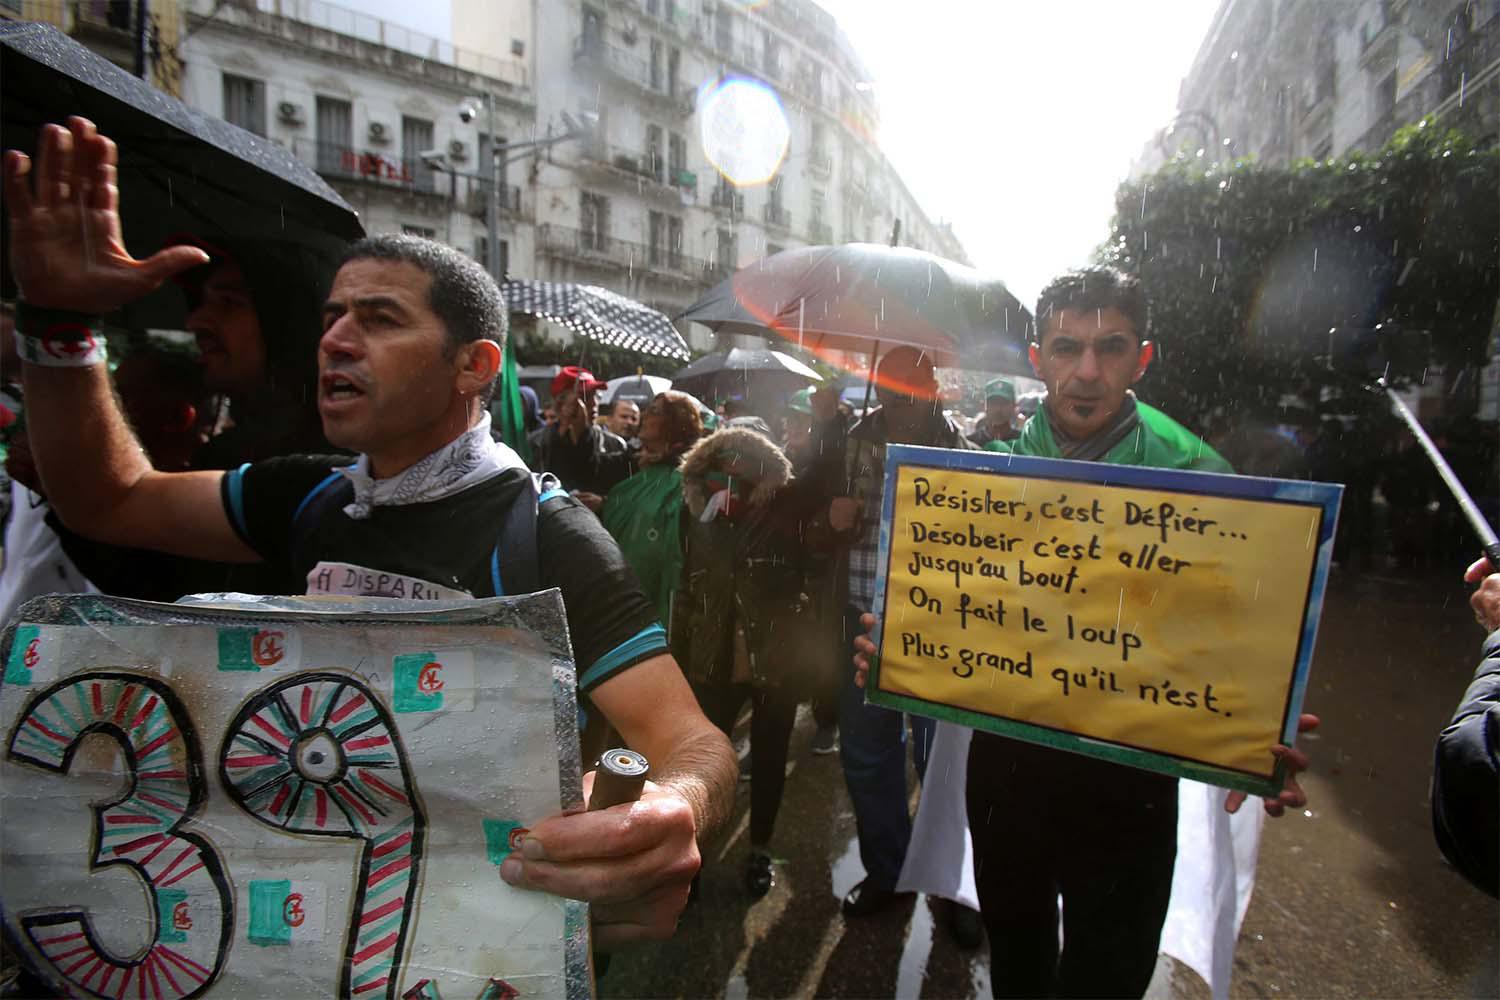 Demonstrators march under heavy rain during a protest against the country's ruling elite